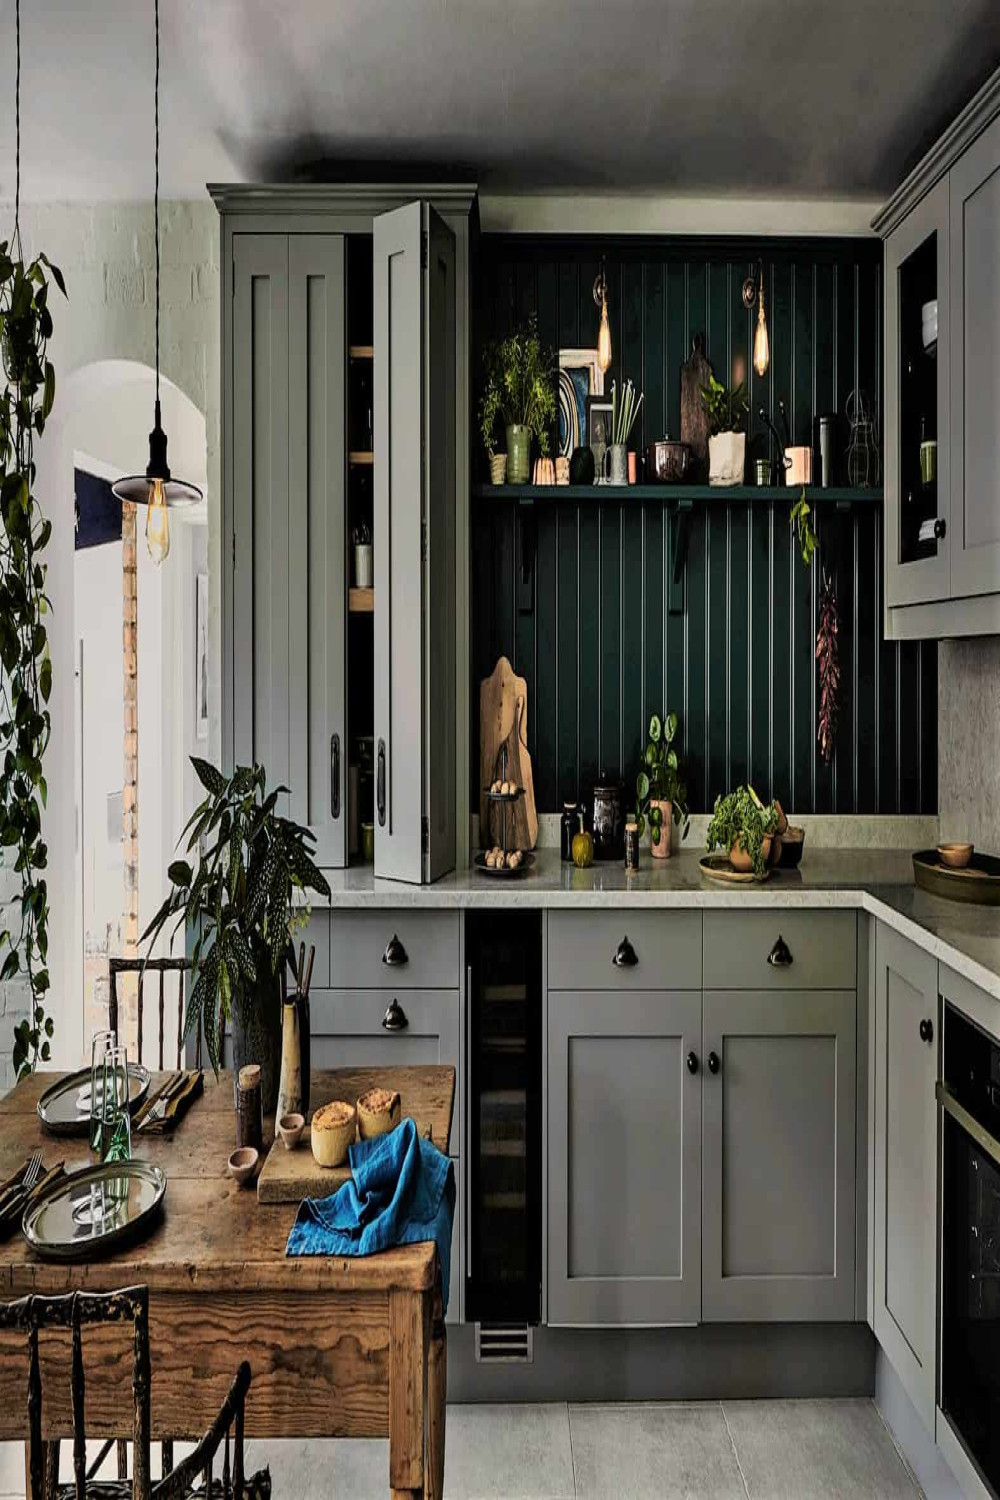 Decorating Your Country Kitchen For   John Lewis of Hungerford